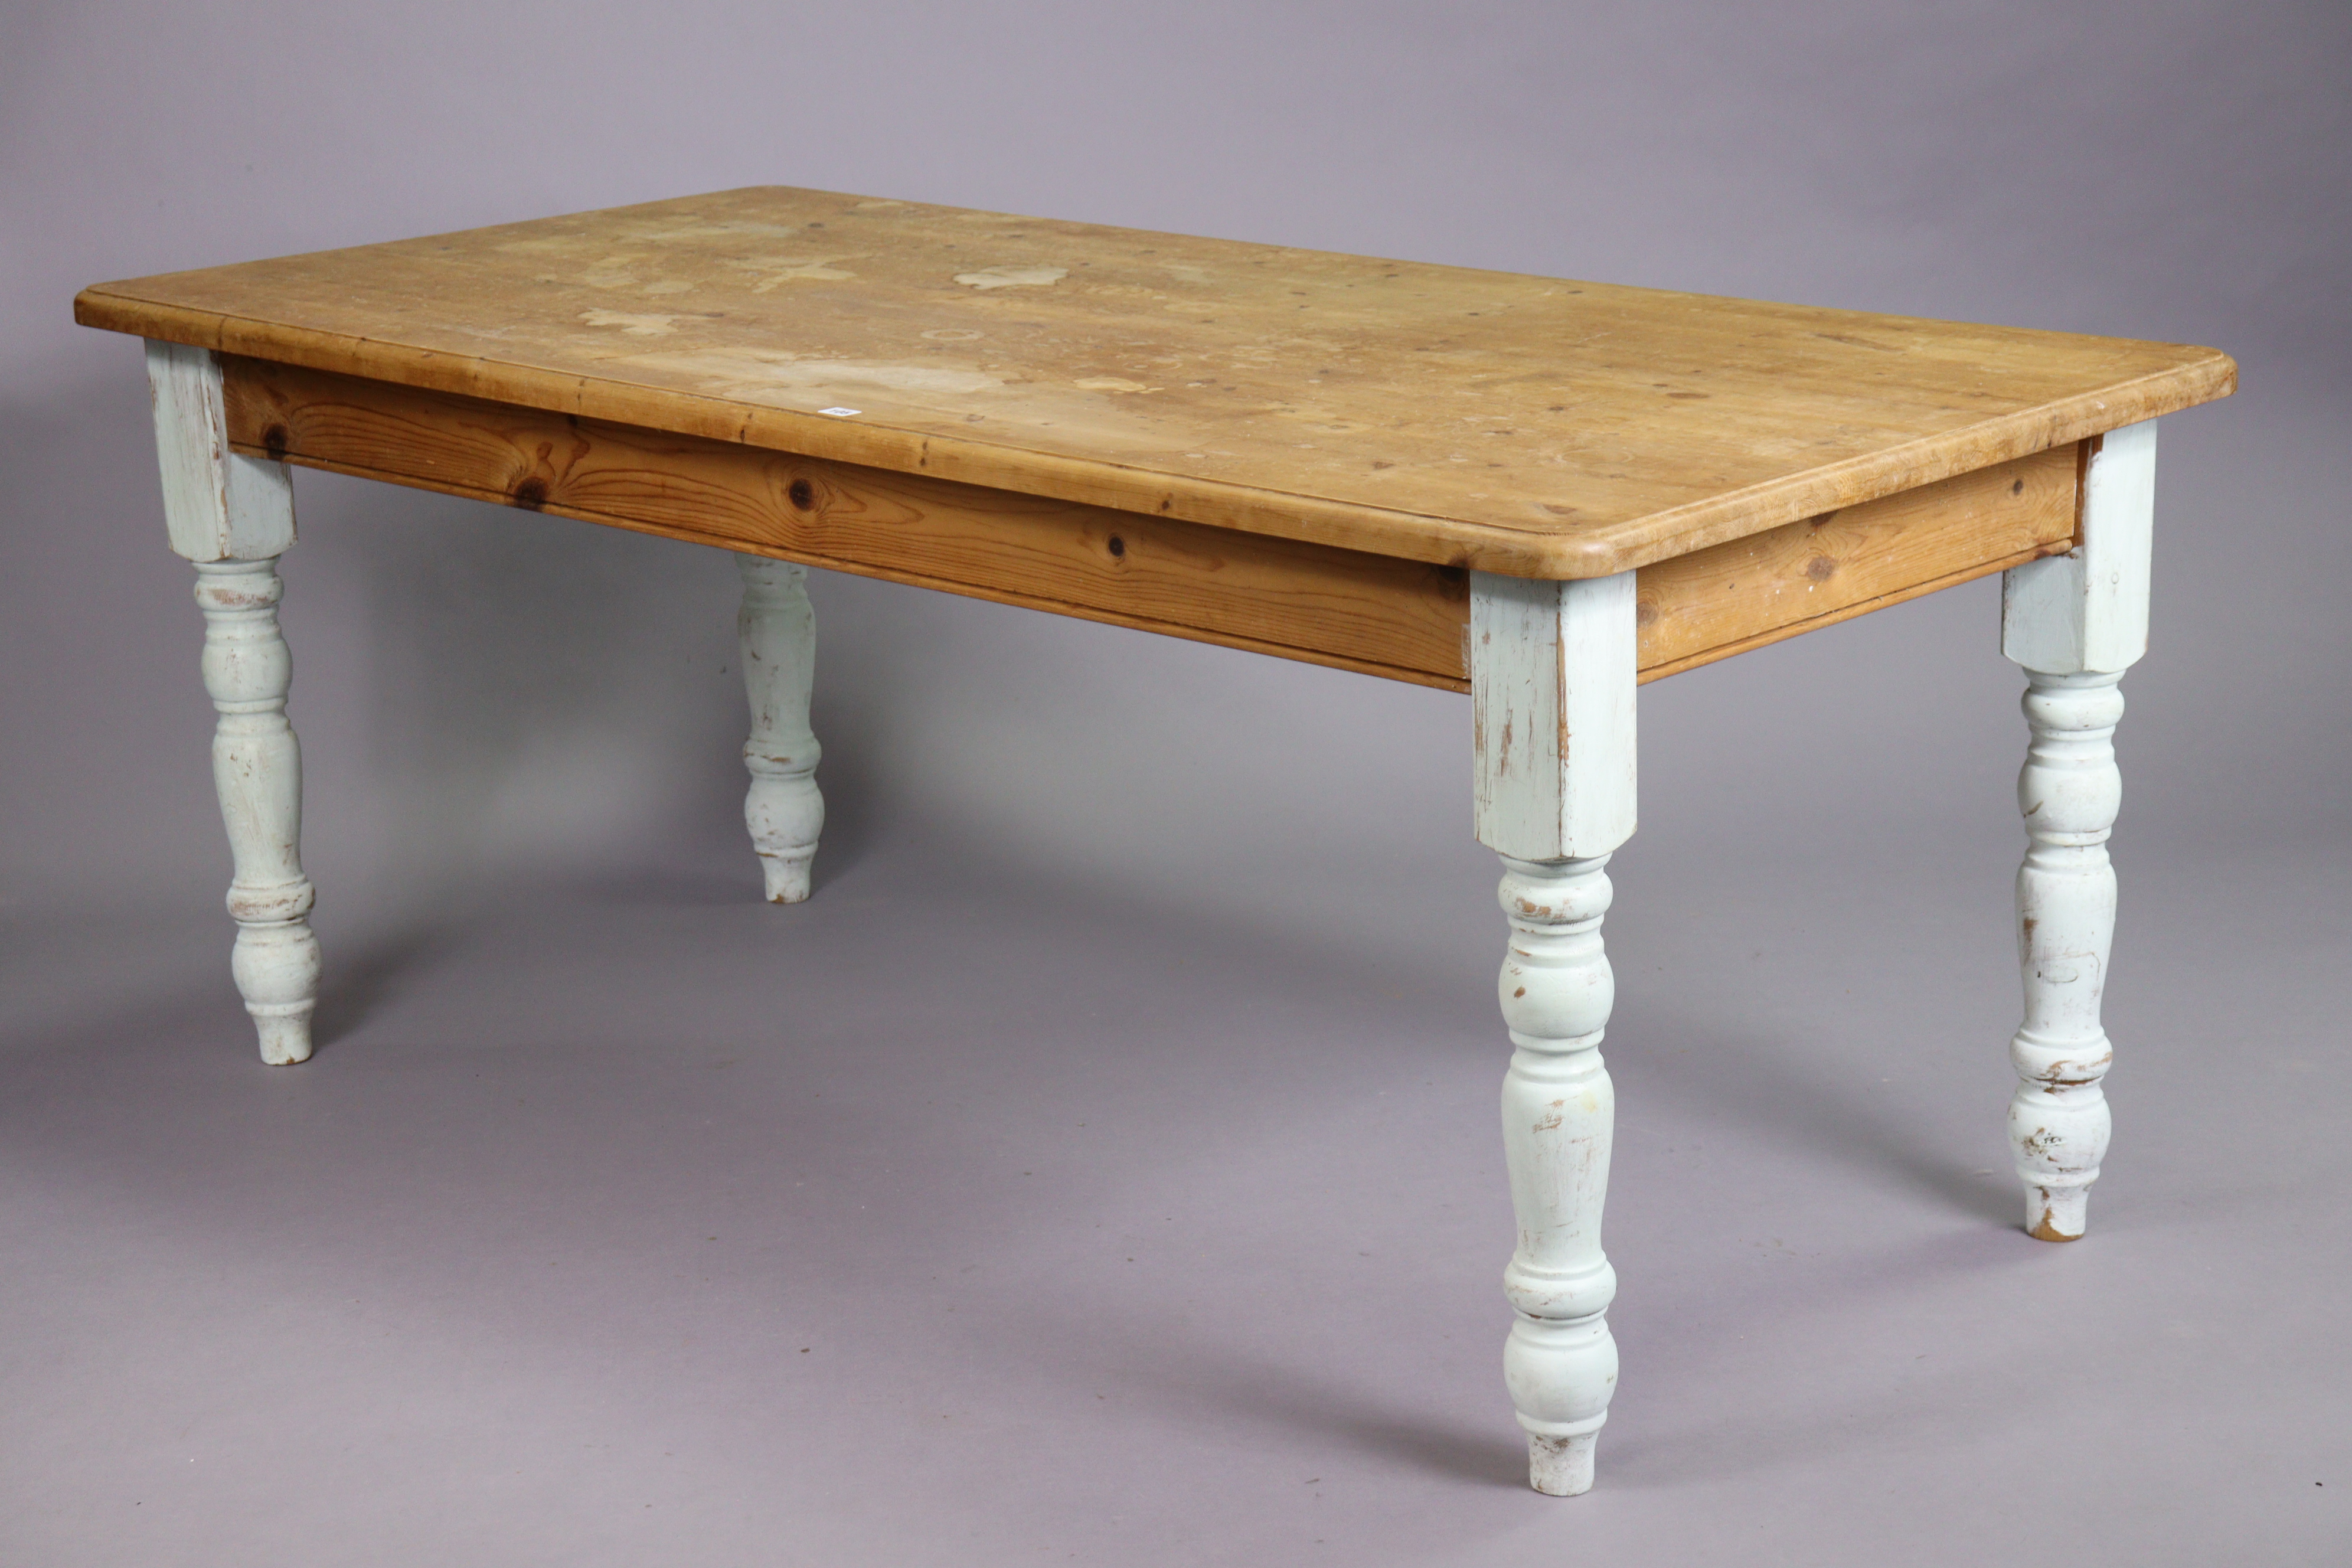 A pine kitchen table with a moulded edge & rounded corners to the rectangular top, & on four painted